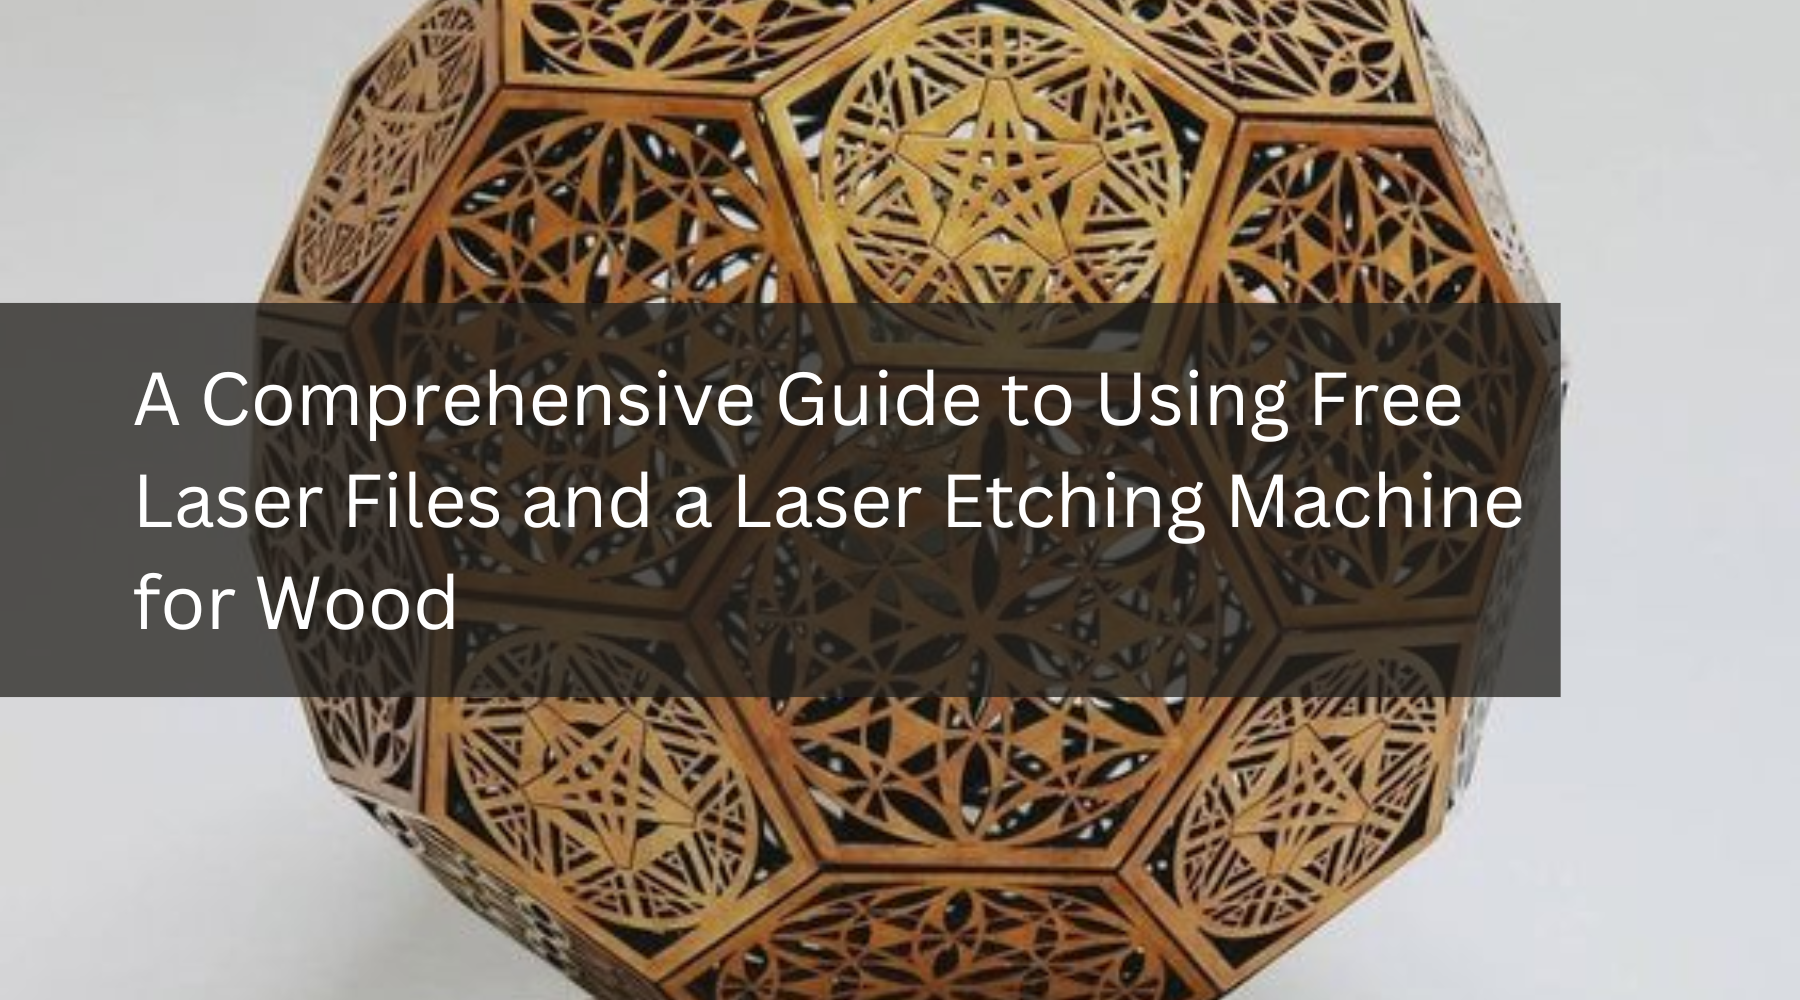 A Comprehensive Guide to Using Free Laser Files and a Laser Etching Machine for Wood